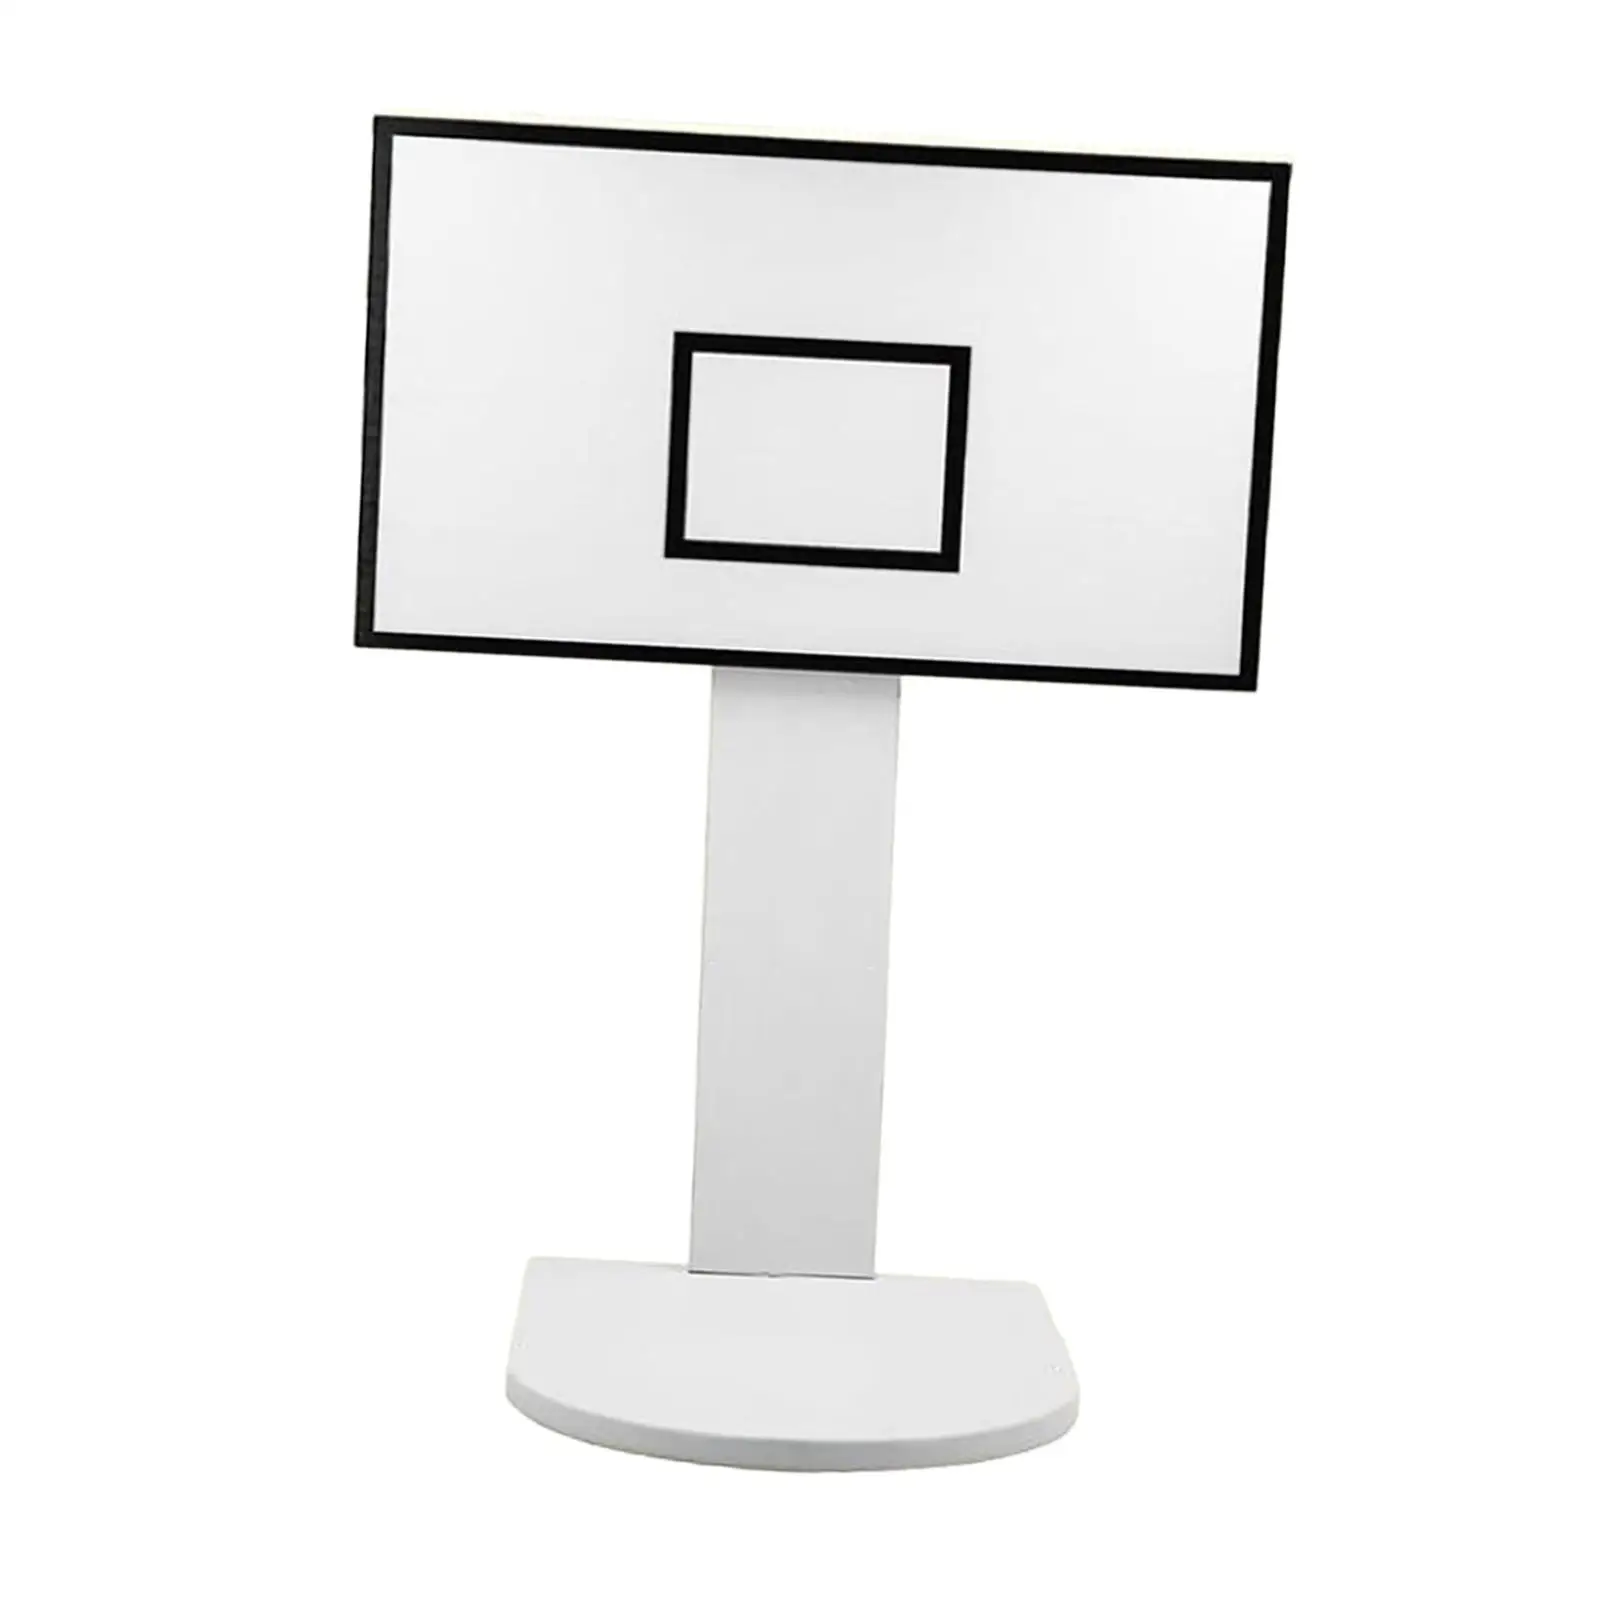 Basketball Rack without Trash Baskets Home Decor Indoor Garbage Can Basketball Frame for Home Office Shop